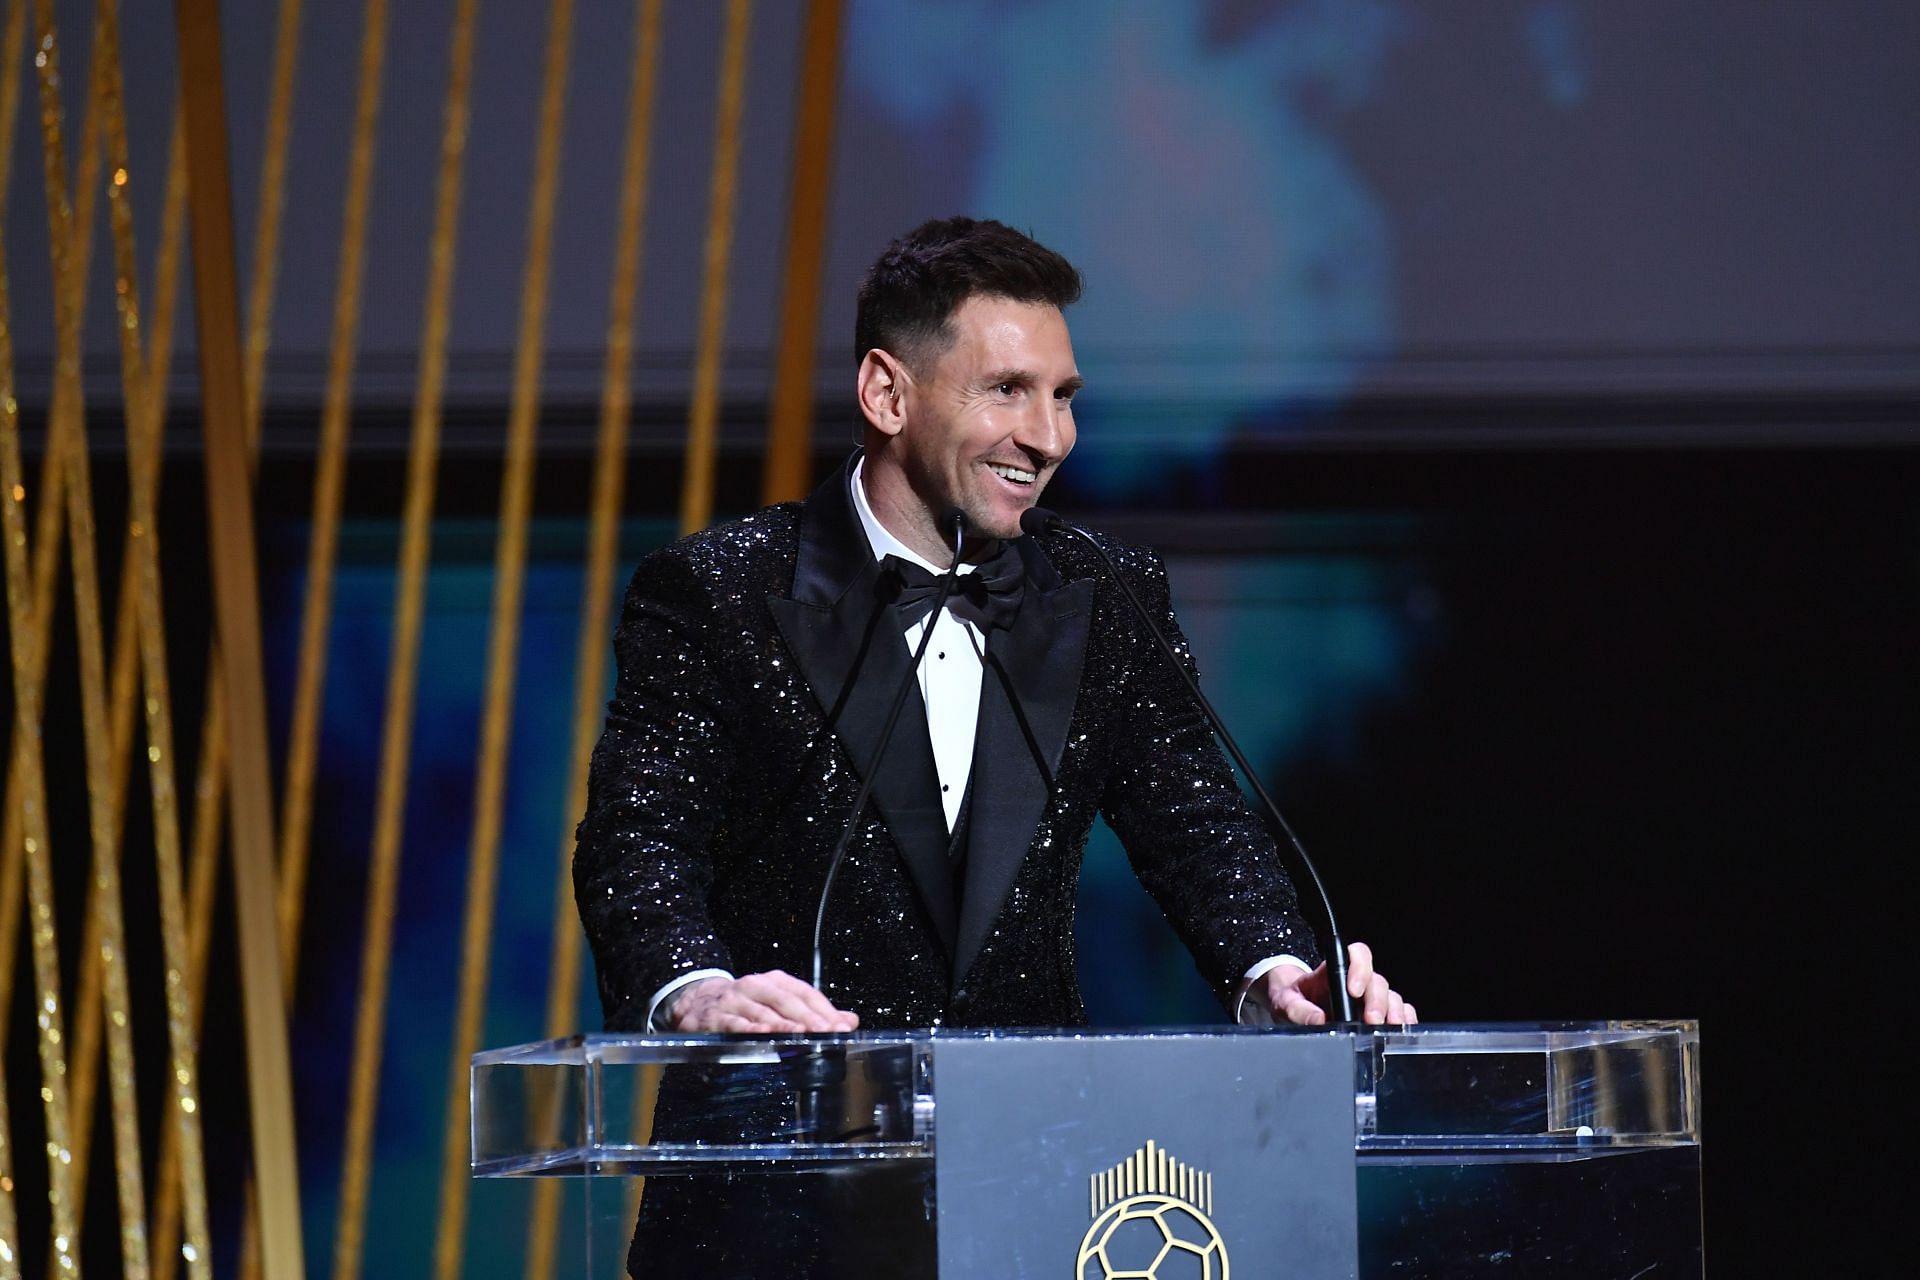 Lionel Messi says he never imagined he would be named among the best players in the world.